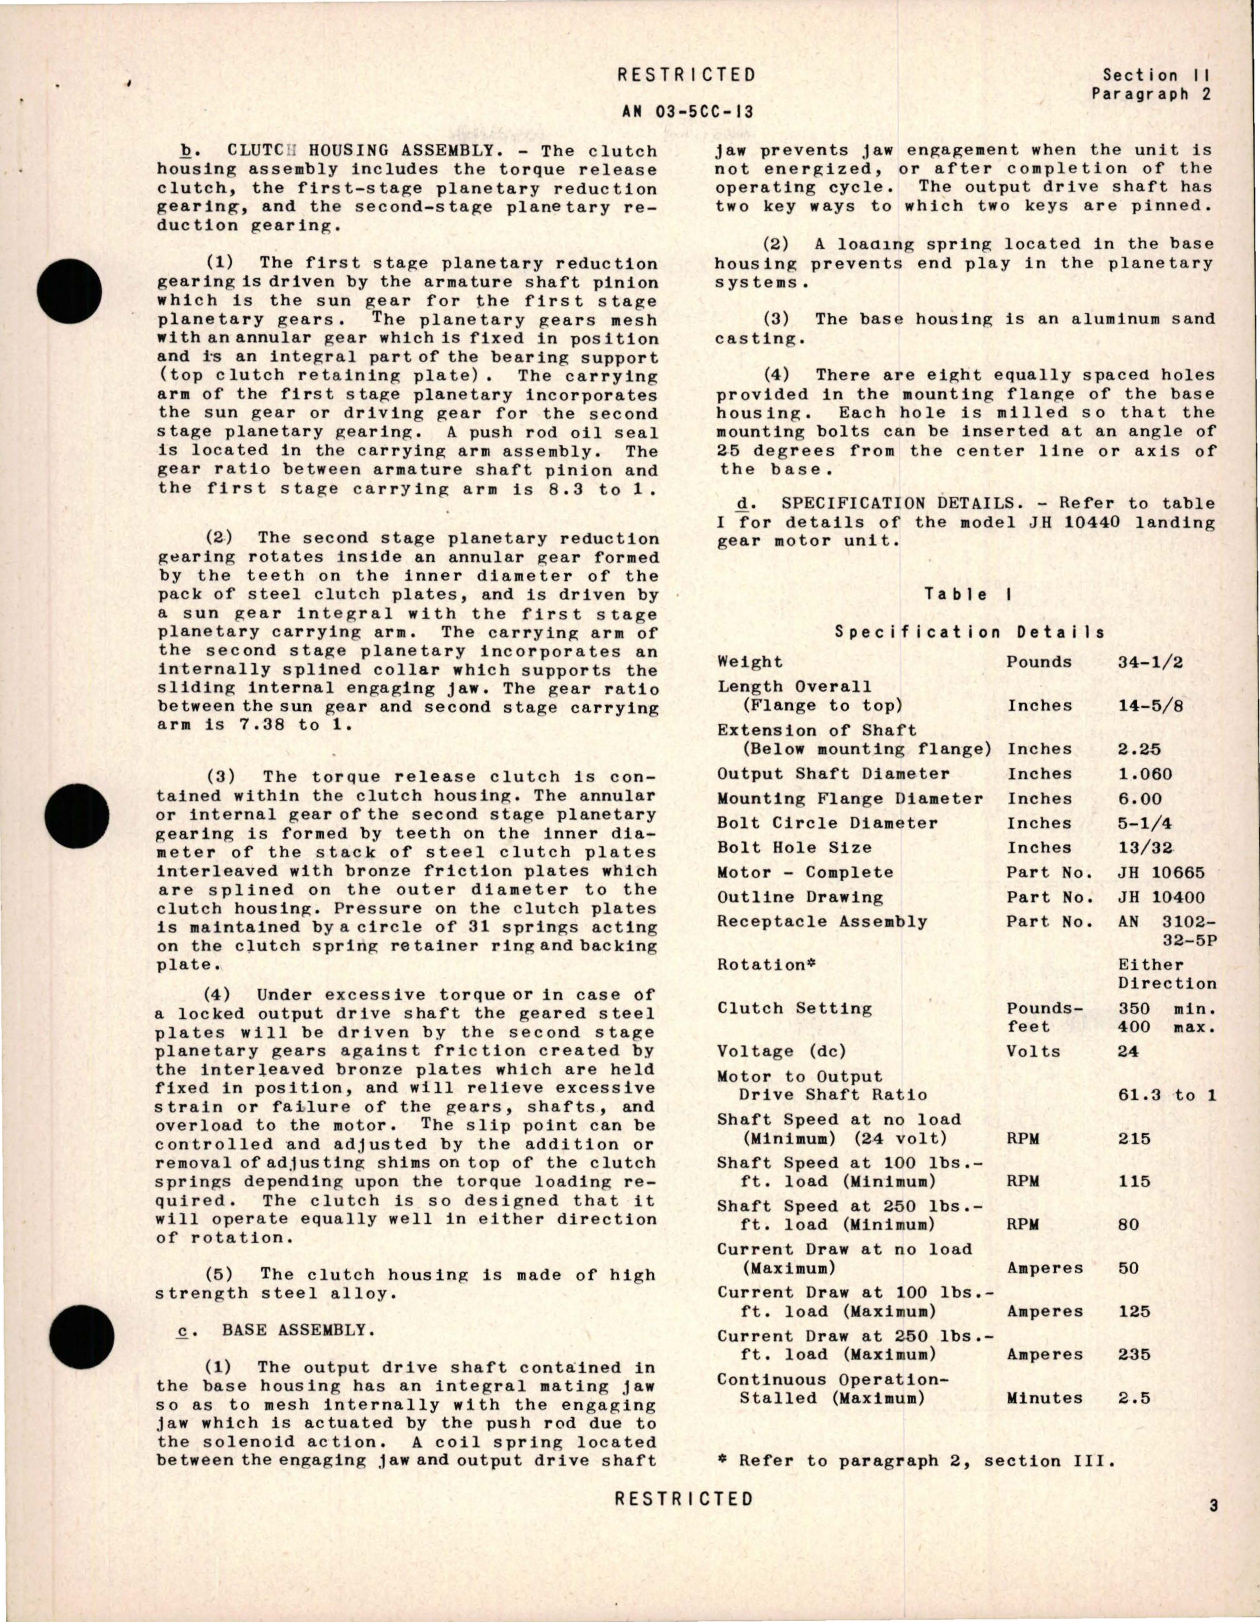 Sample page 7 from AirCorps Library document: Instructions with Parts Catalog for Landing Wheel Retracting Motor - Model JH 10440